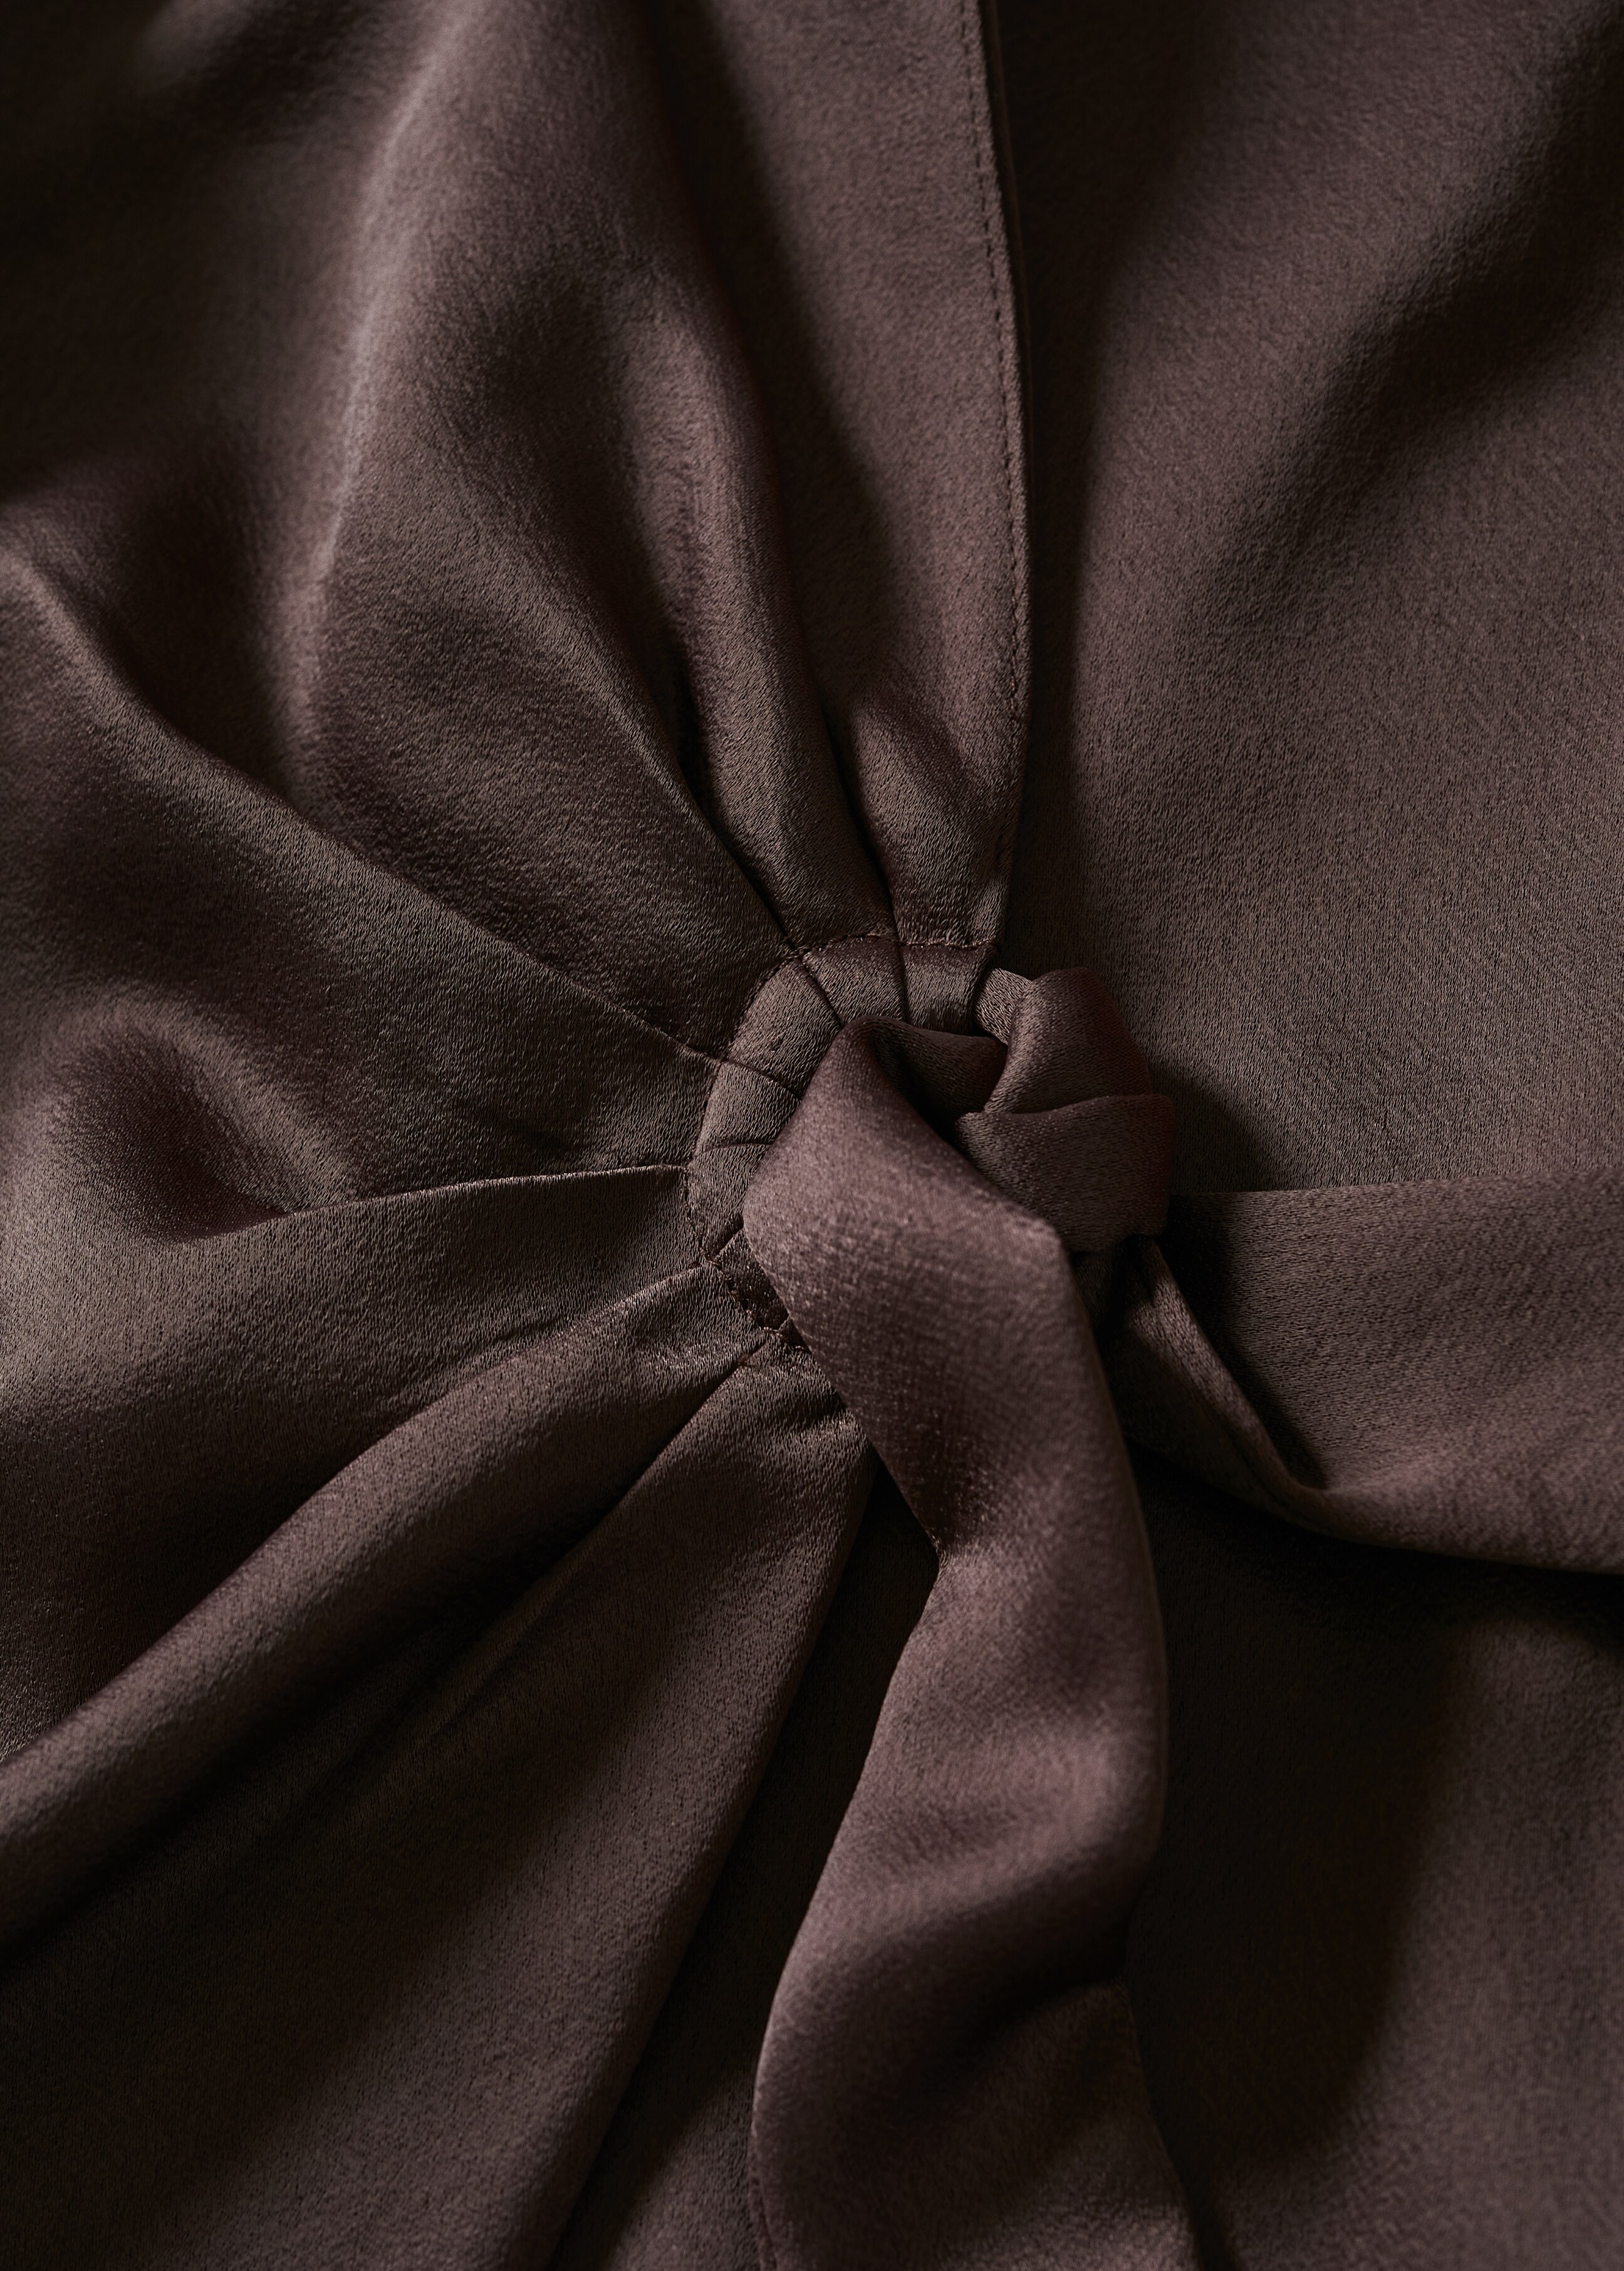 Satin shirt dress - Details of the article 8